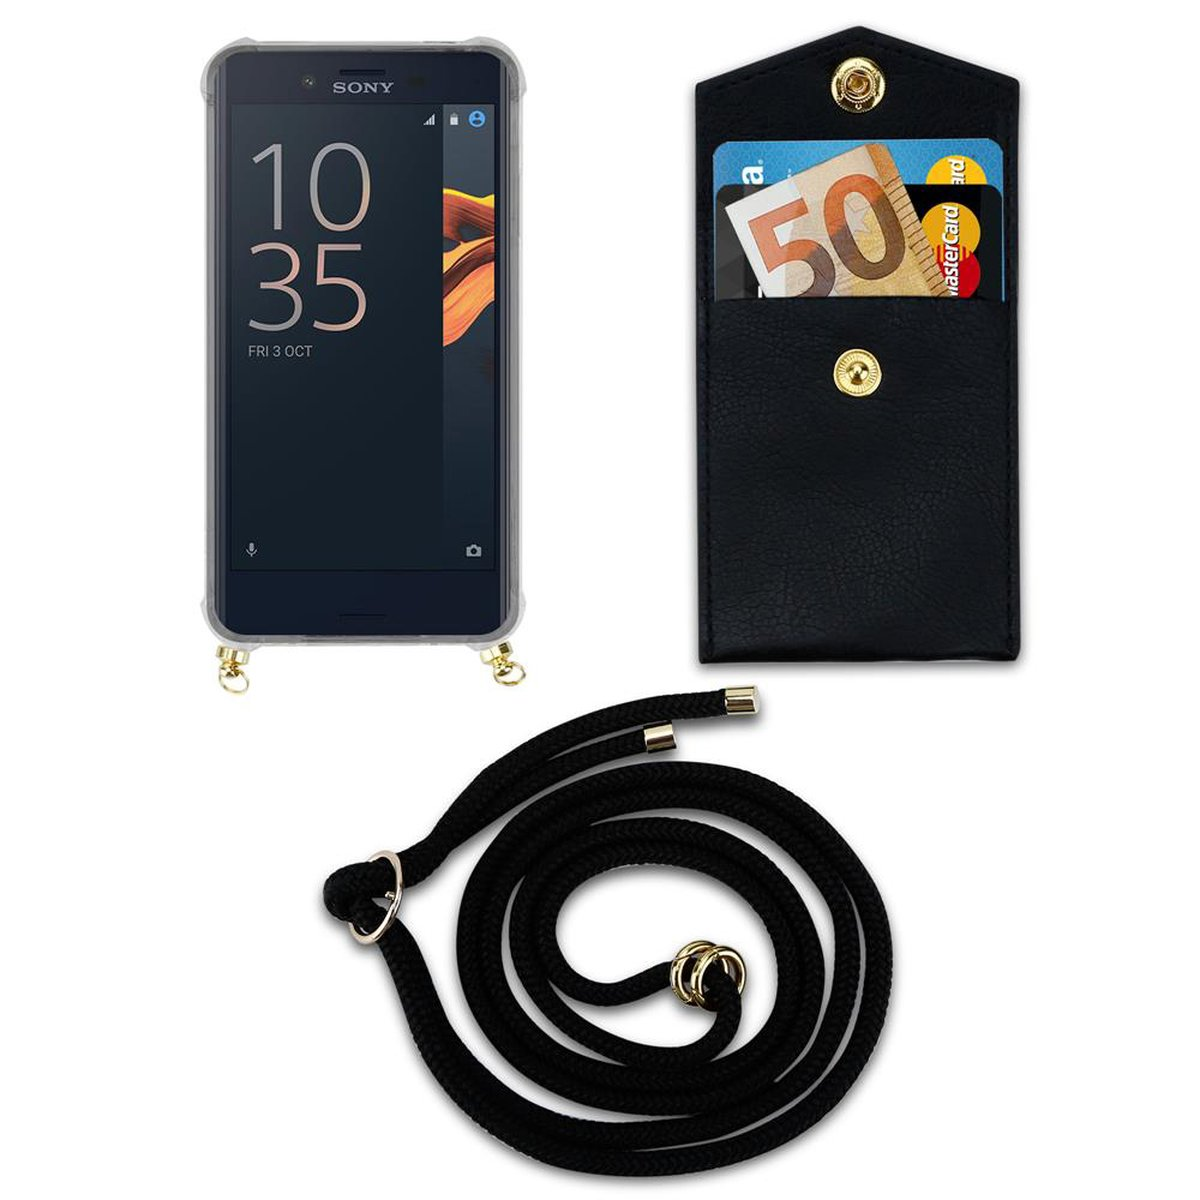 abnehmbarer X Backcover, Xperia COMPACT, Handy CADORABO Kordel Hülle, mit Kette und Band SCHWARZ Sony, Gold Ringen,